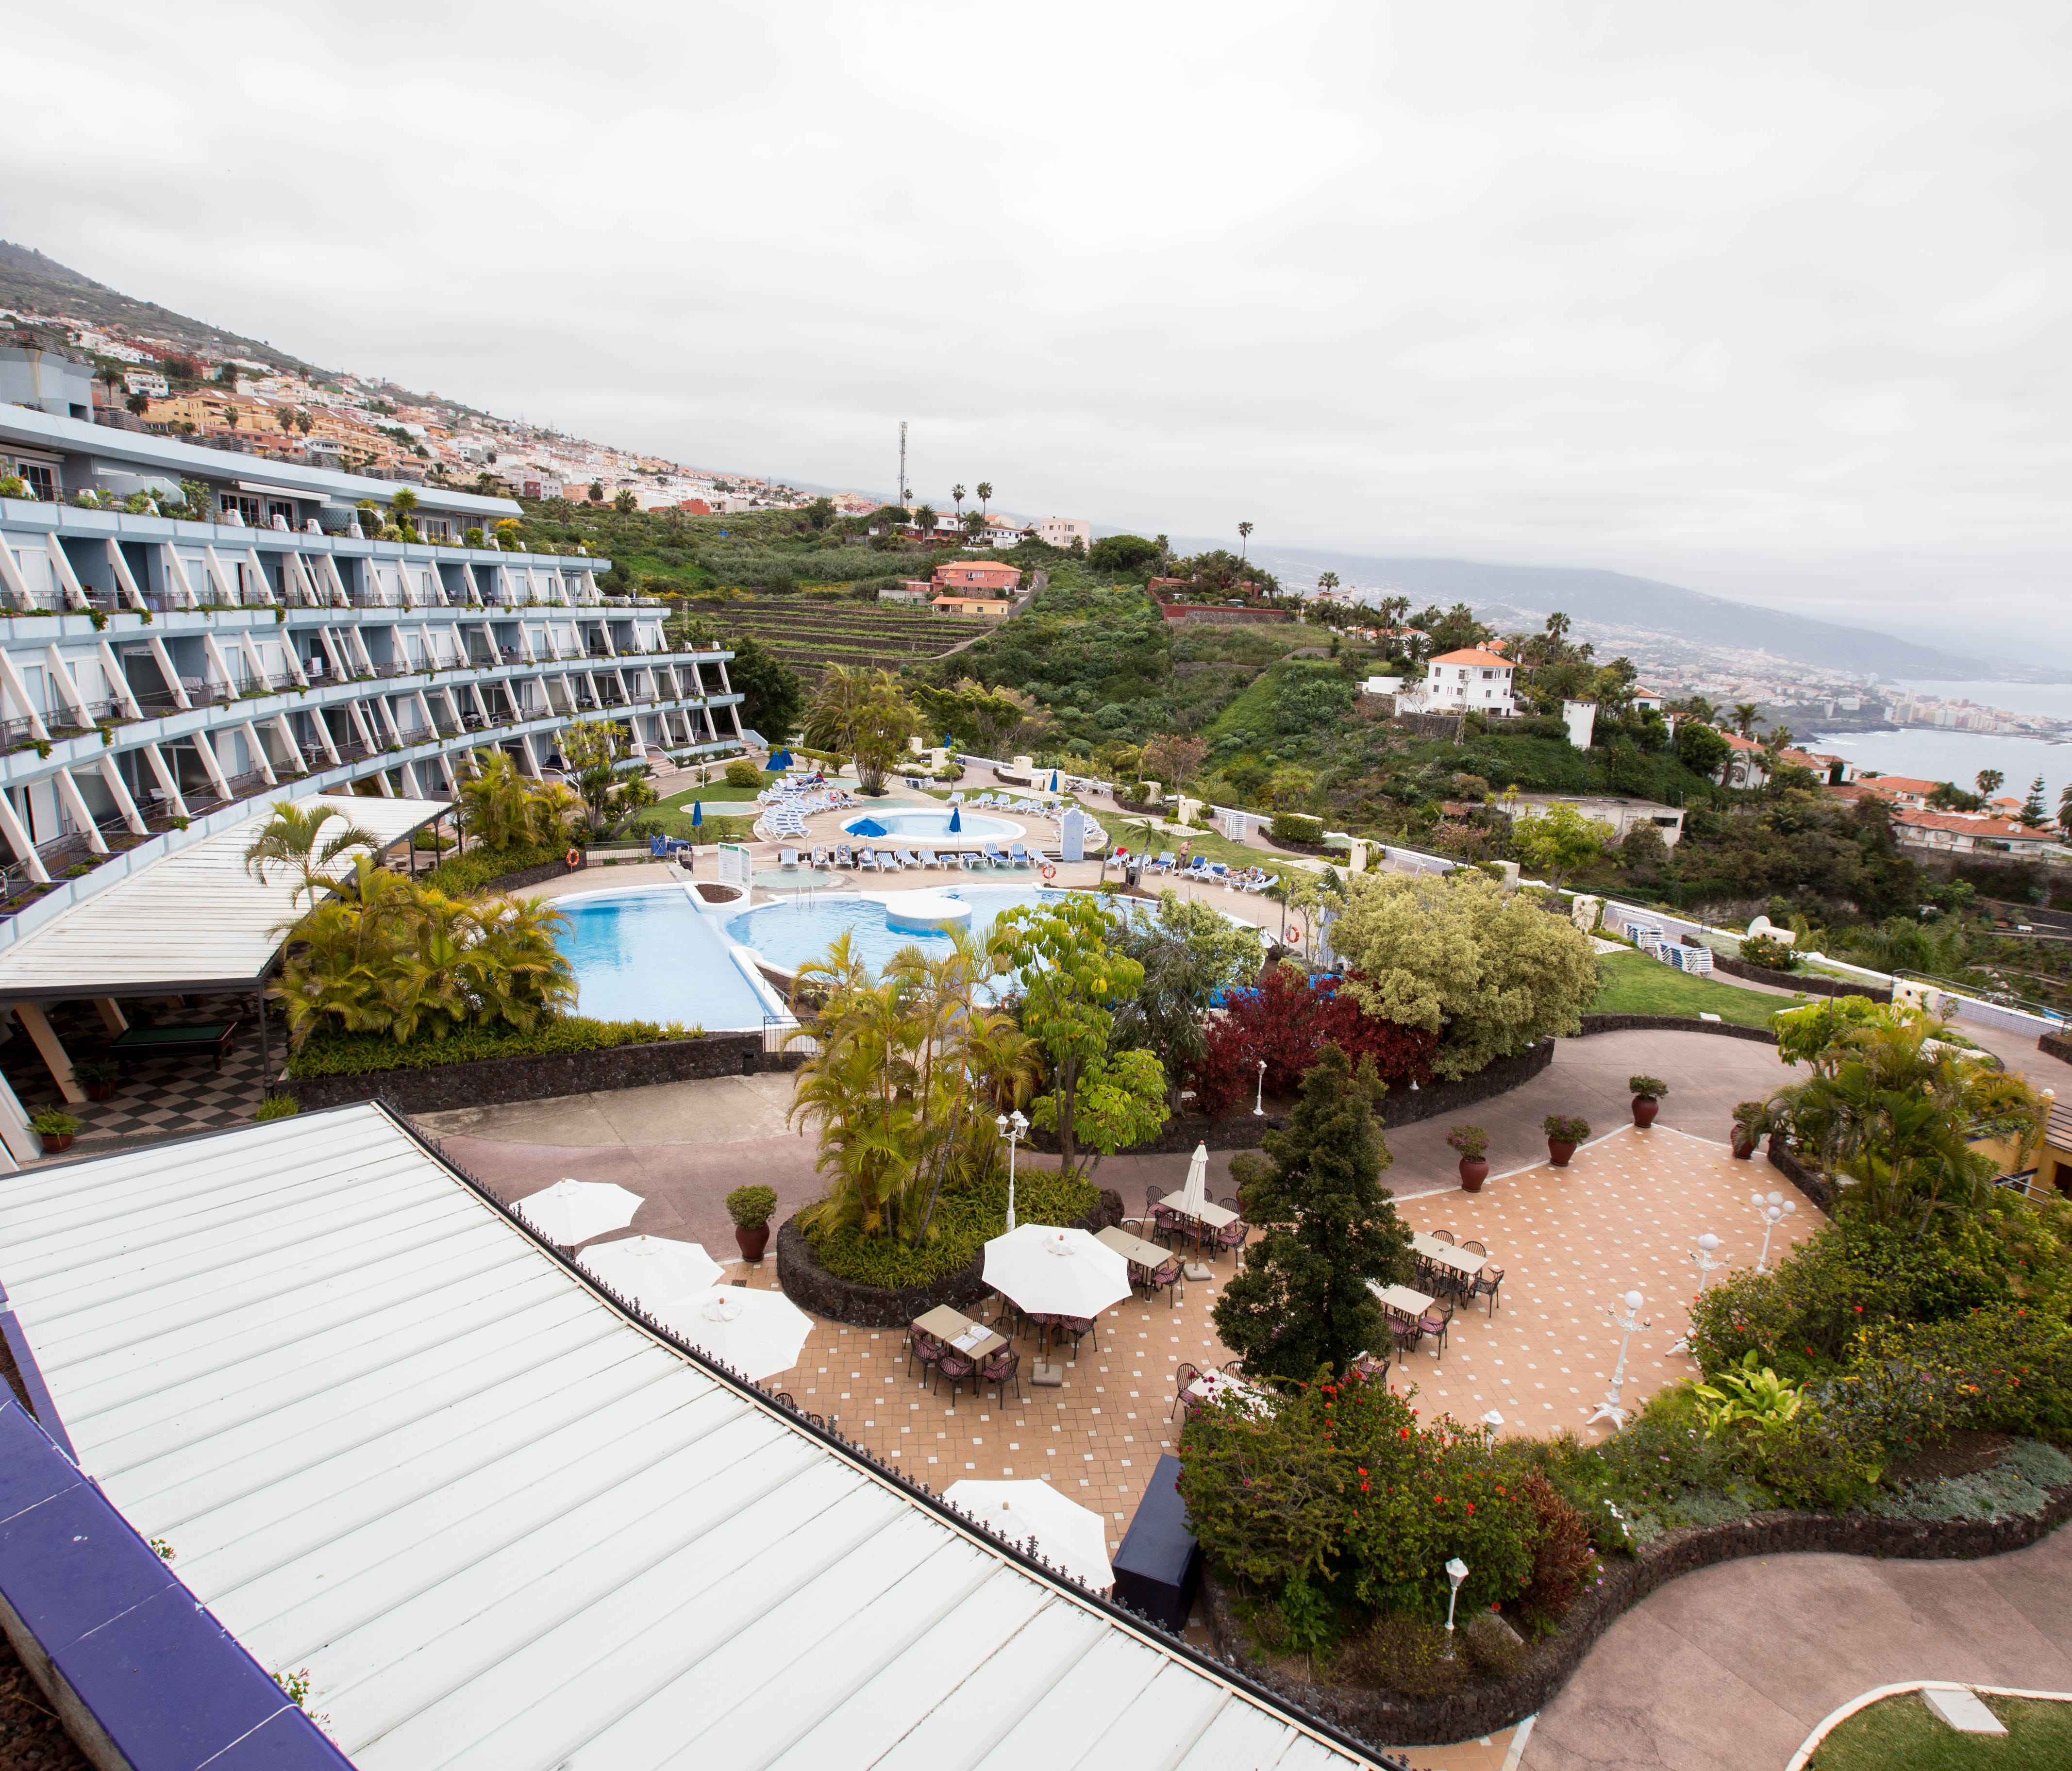 La Quinta Park Suites, Tenerife, Canary Islands: Looking for a quiet hotel in Tenerife that's not teeming with crowds? La Quinta Park Suites, housed in a curved building atop a cliff, is the way to go. There may be no beaches within walking distance,